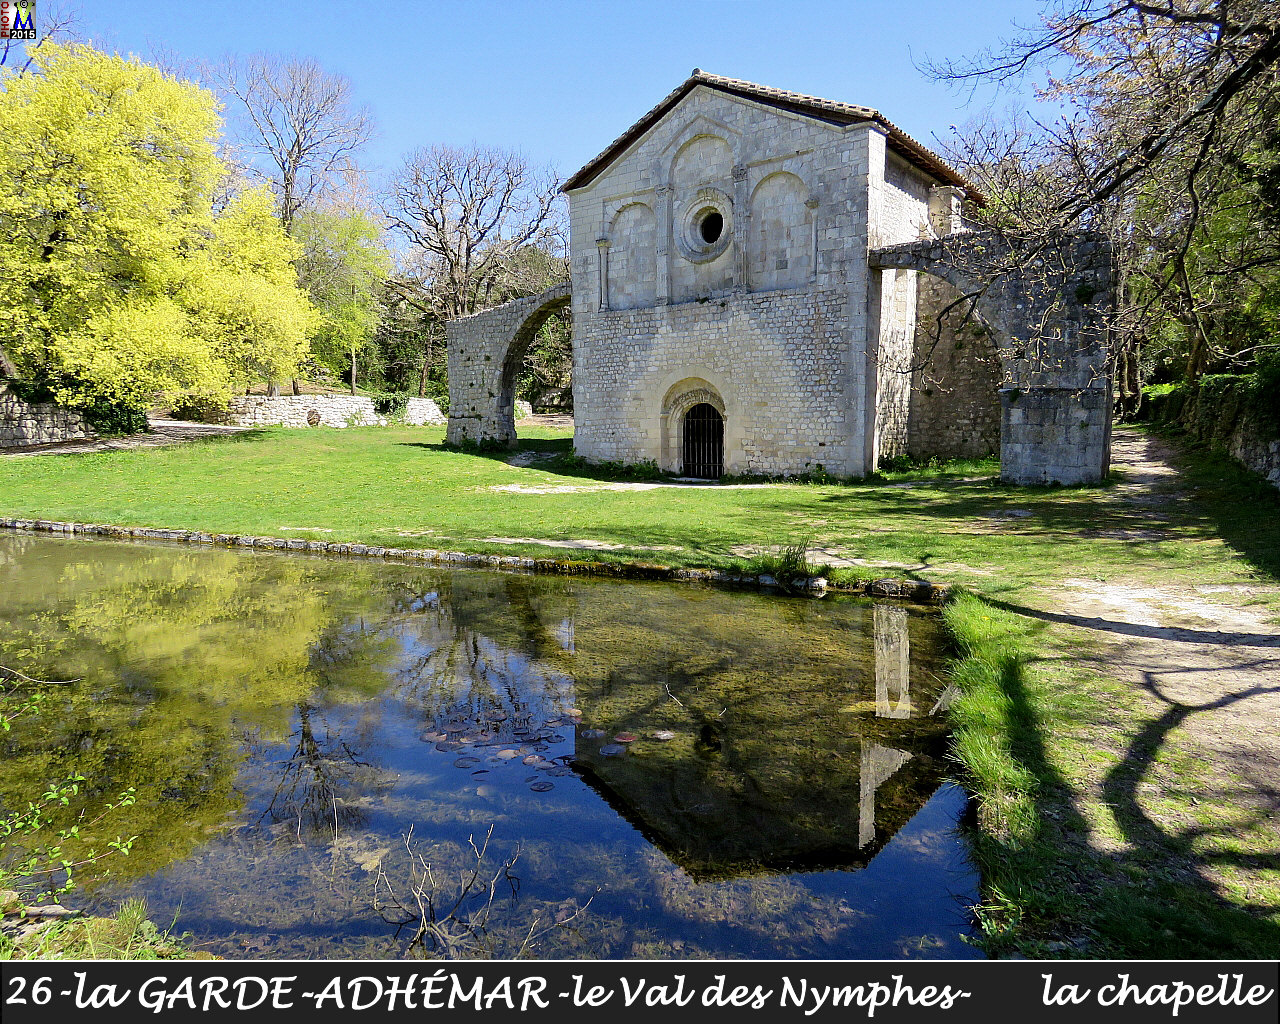 26GARDE-ADHEMARzVAL-NYMPHES_chapelle_100.jpg